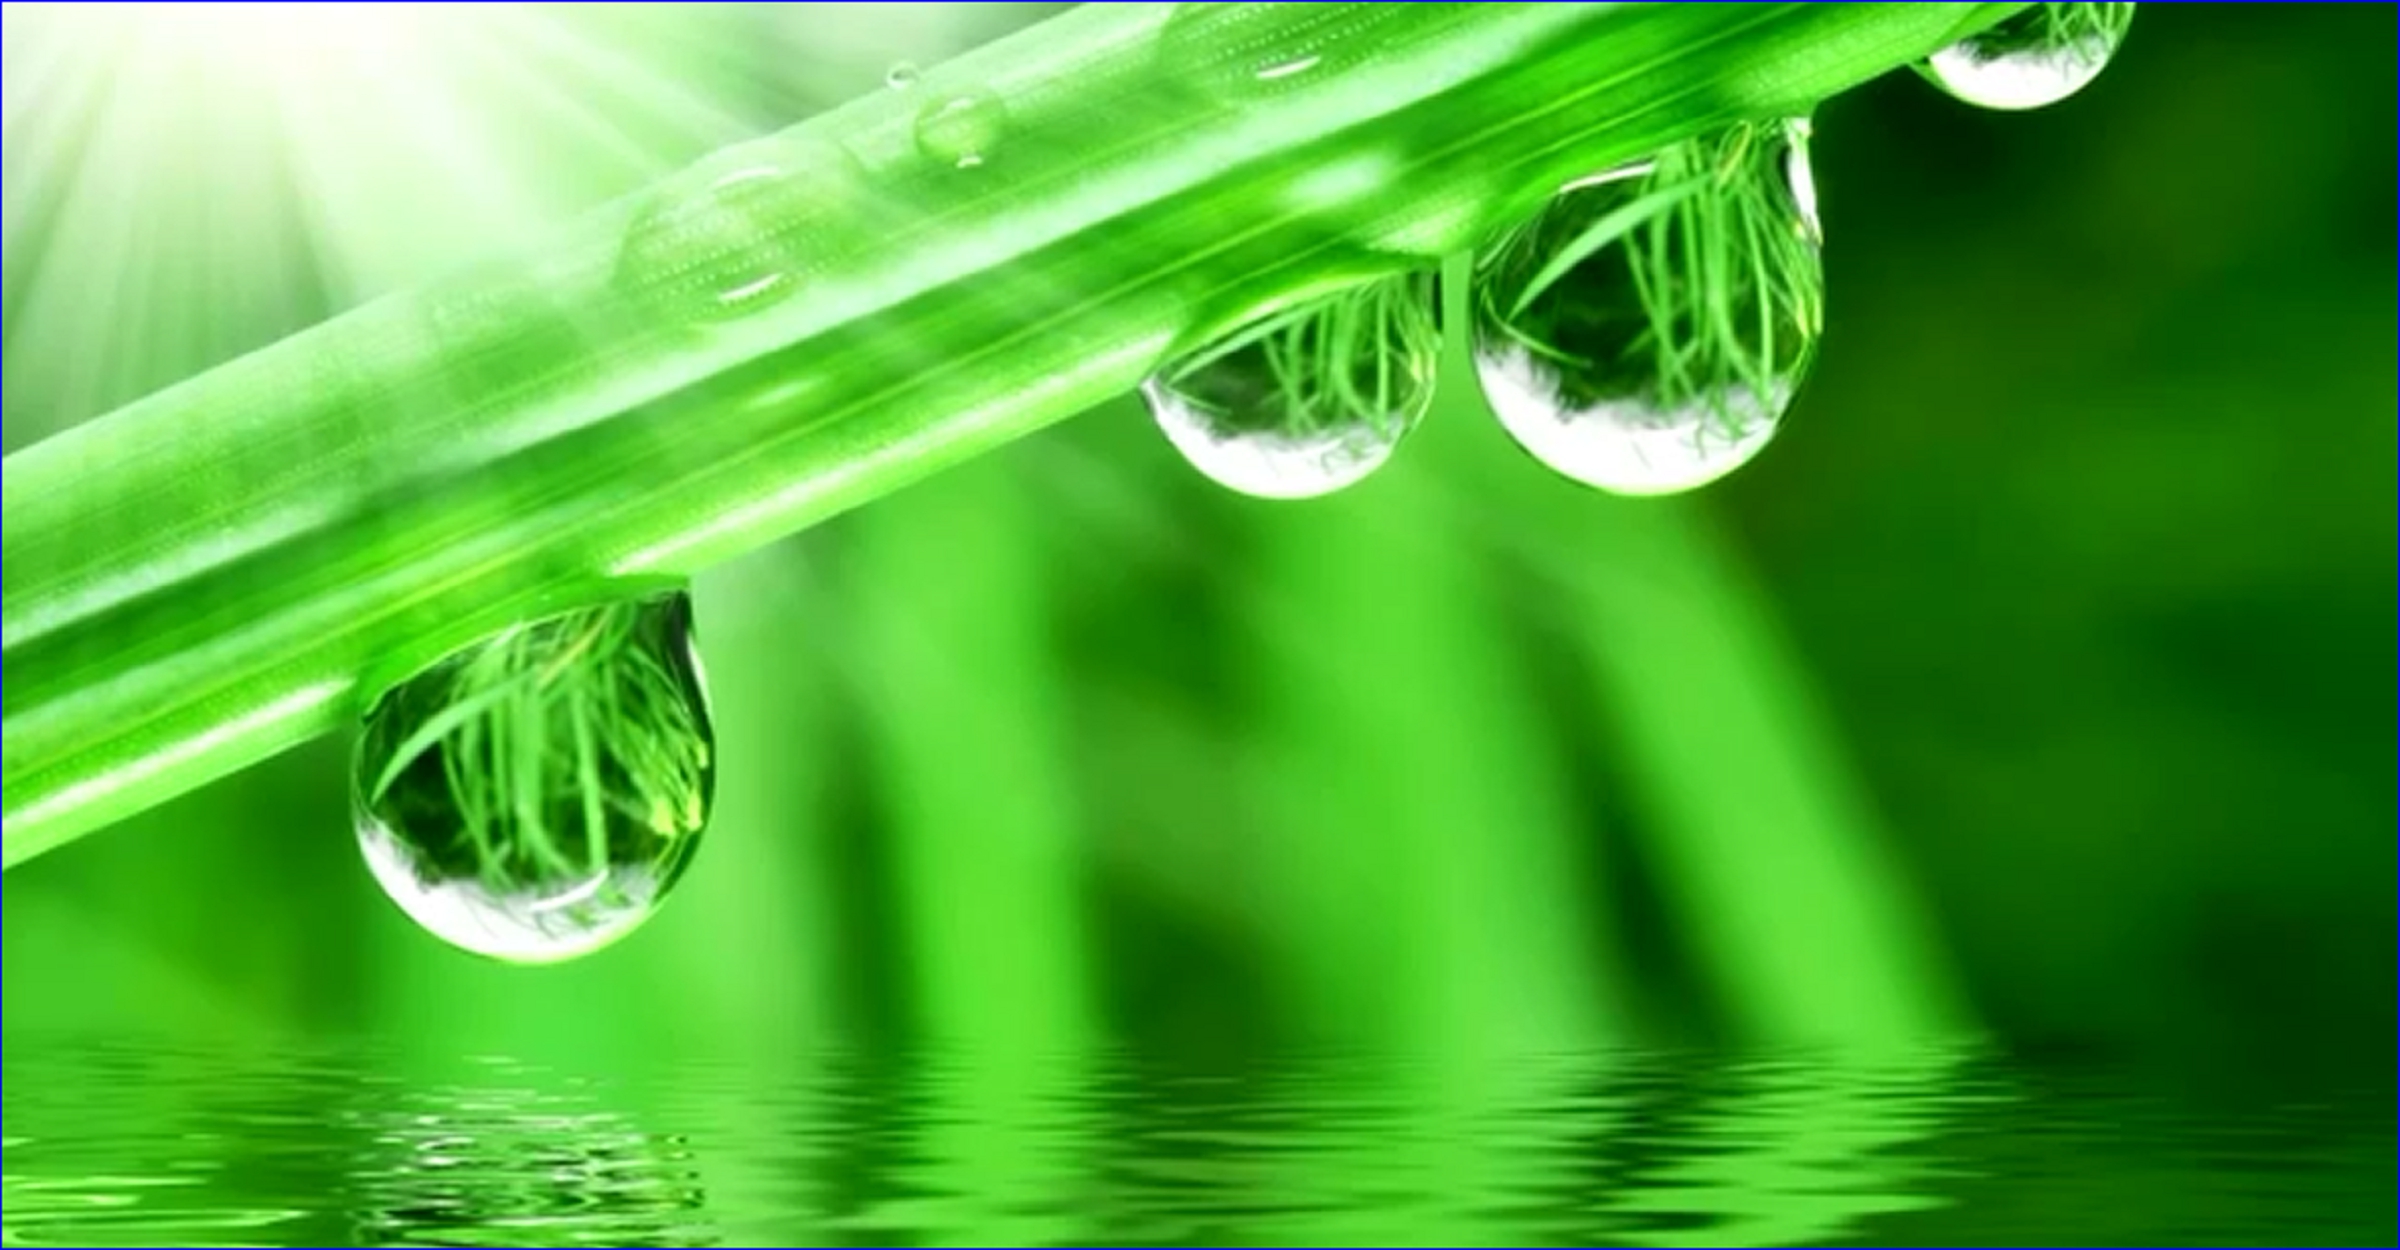 Of Water Wallpaper On Hdwallpapers - Green Background With Water - HD Wallpaper 